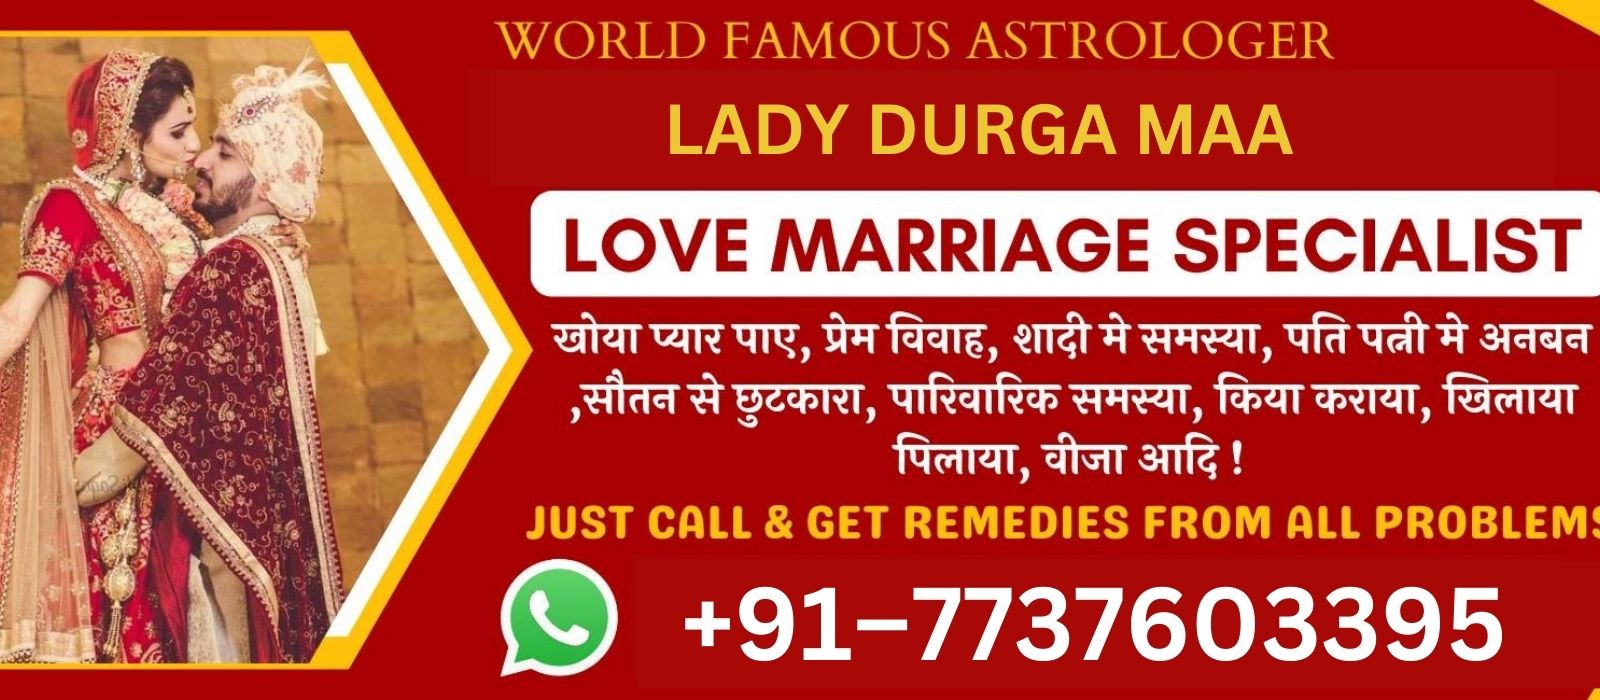 Best Lady Astrologer In The World